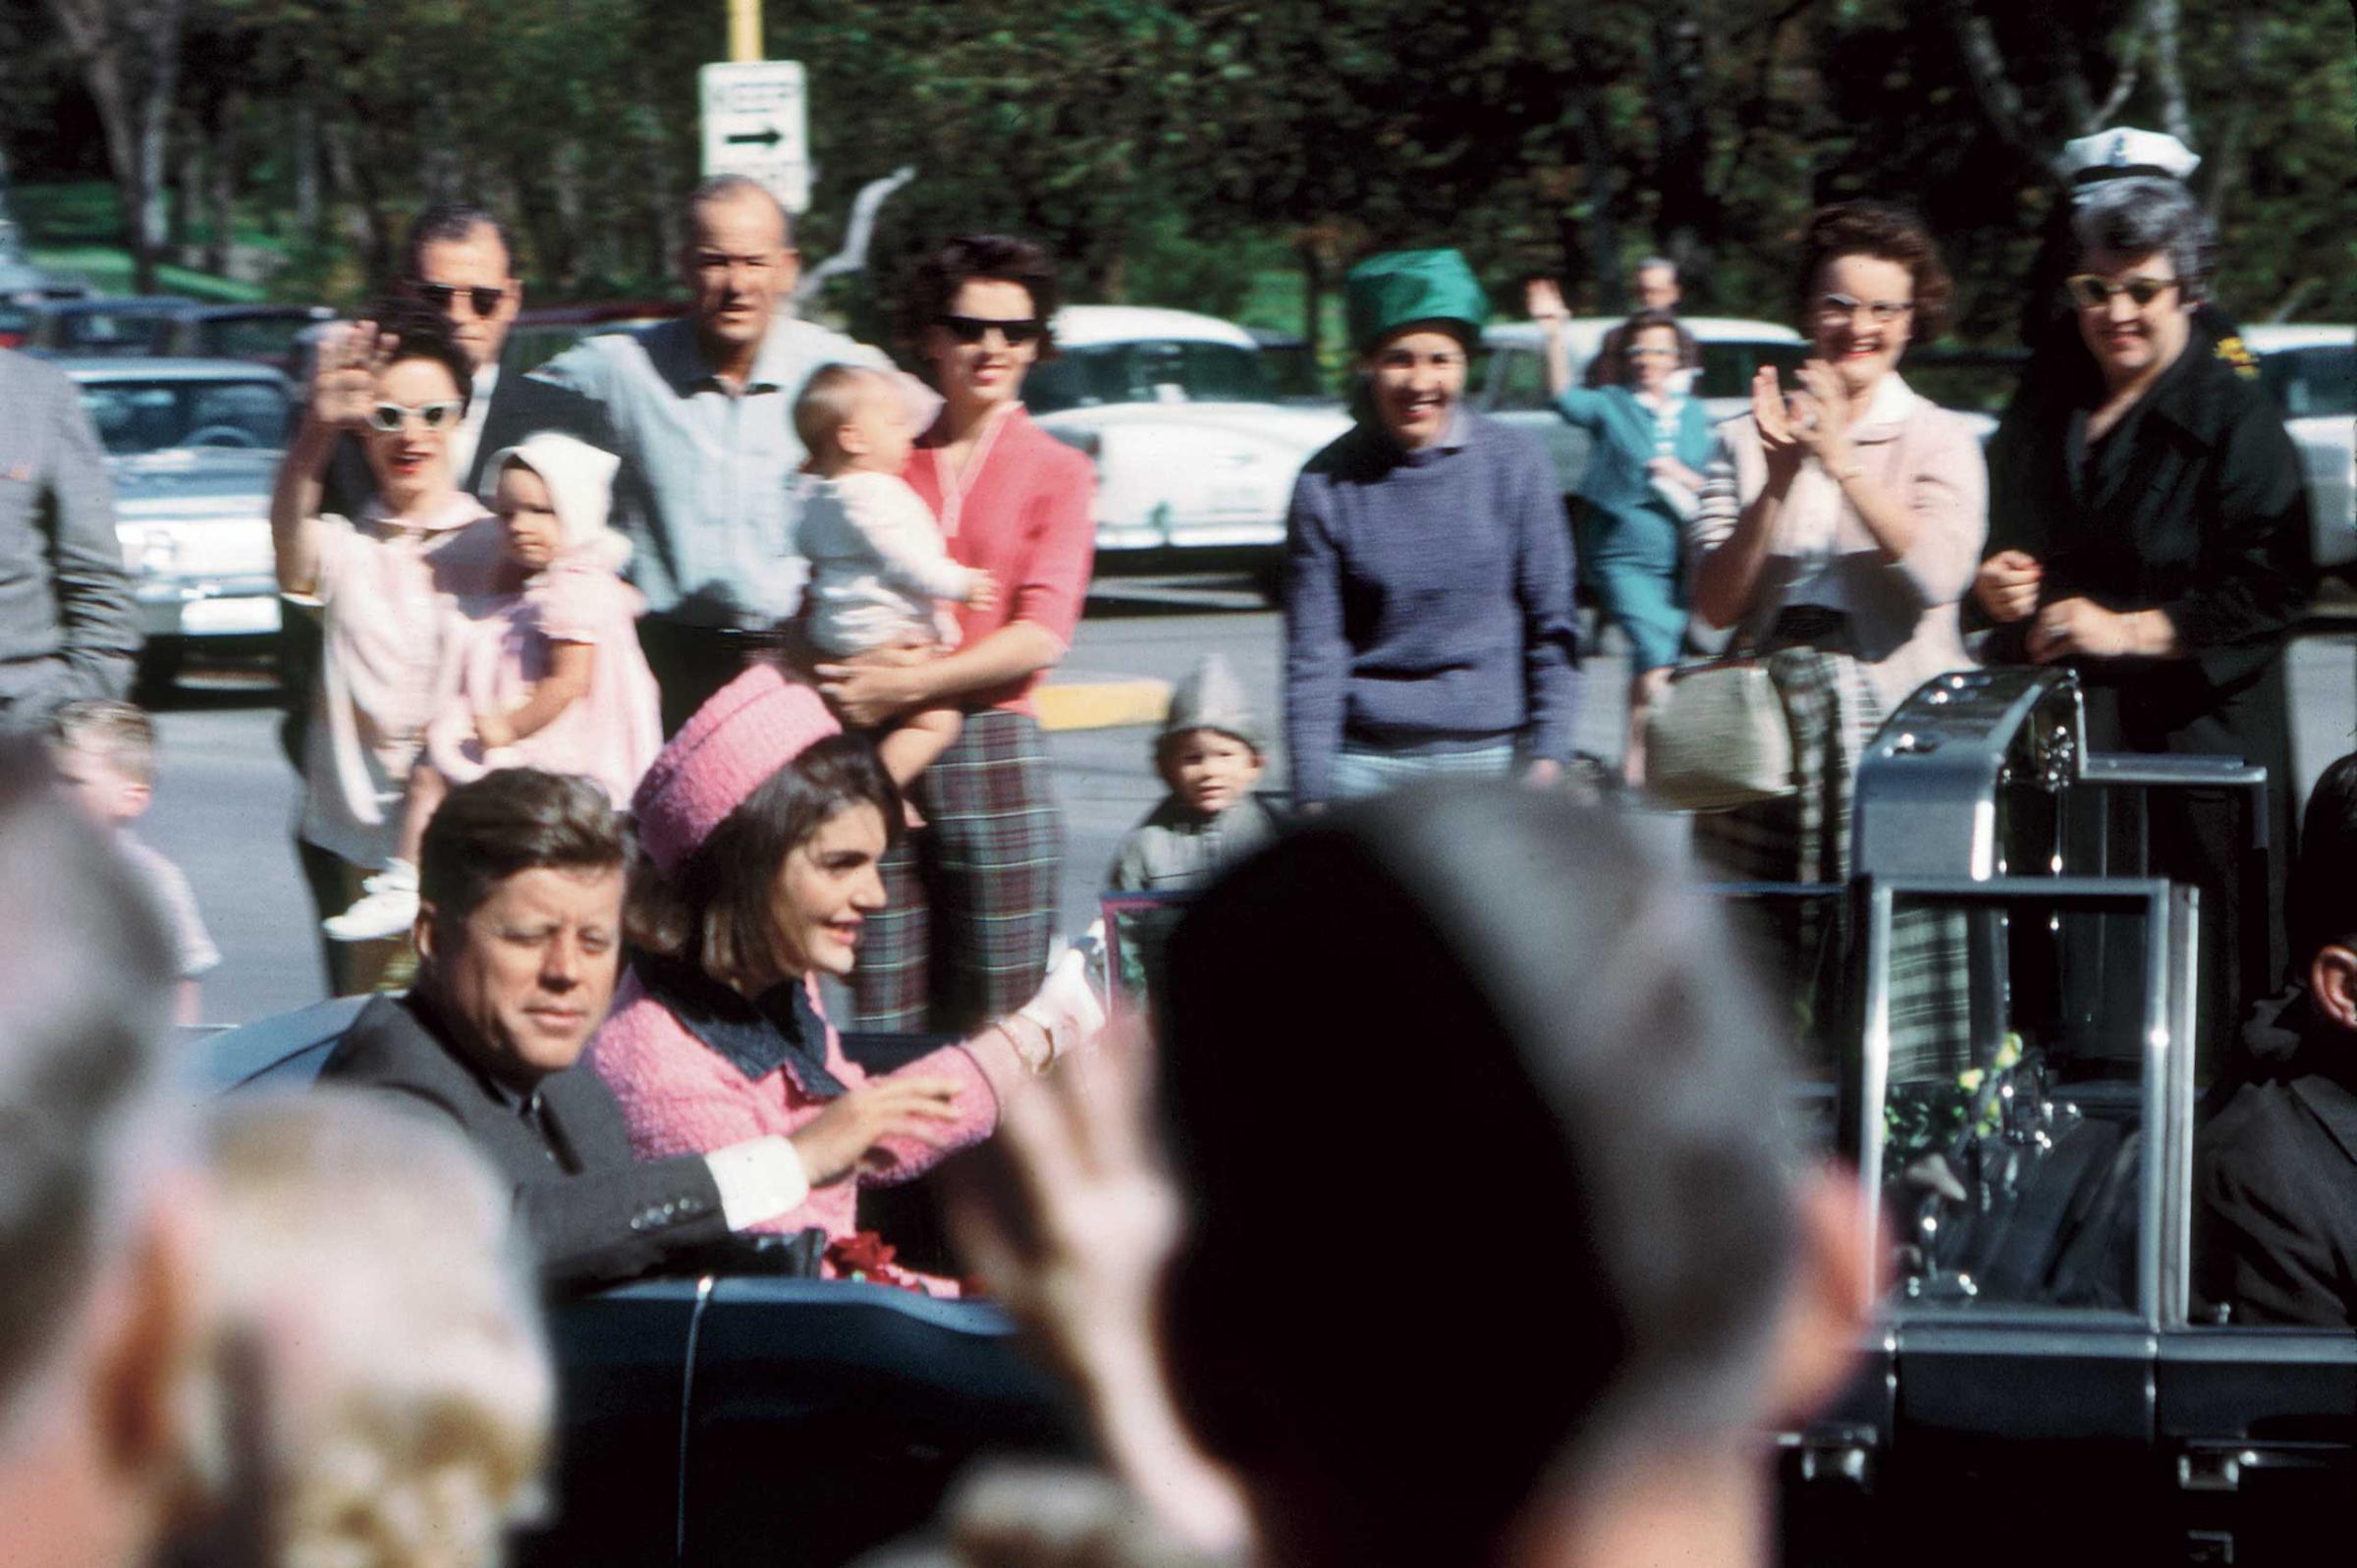 Kennedy's well-wishers crowded close to his limousine as the motorcade neared Dealey Plaza.